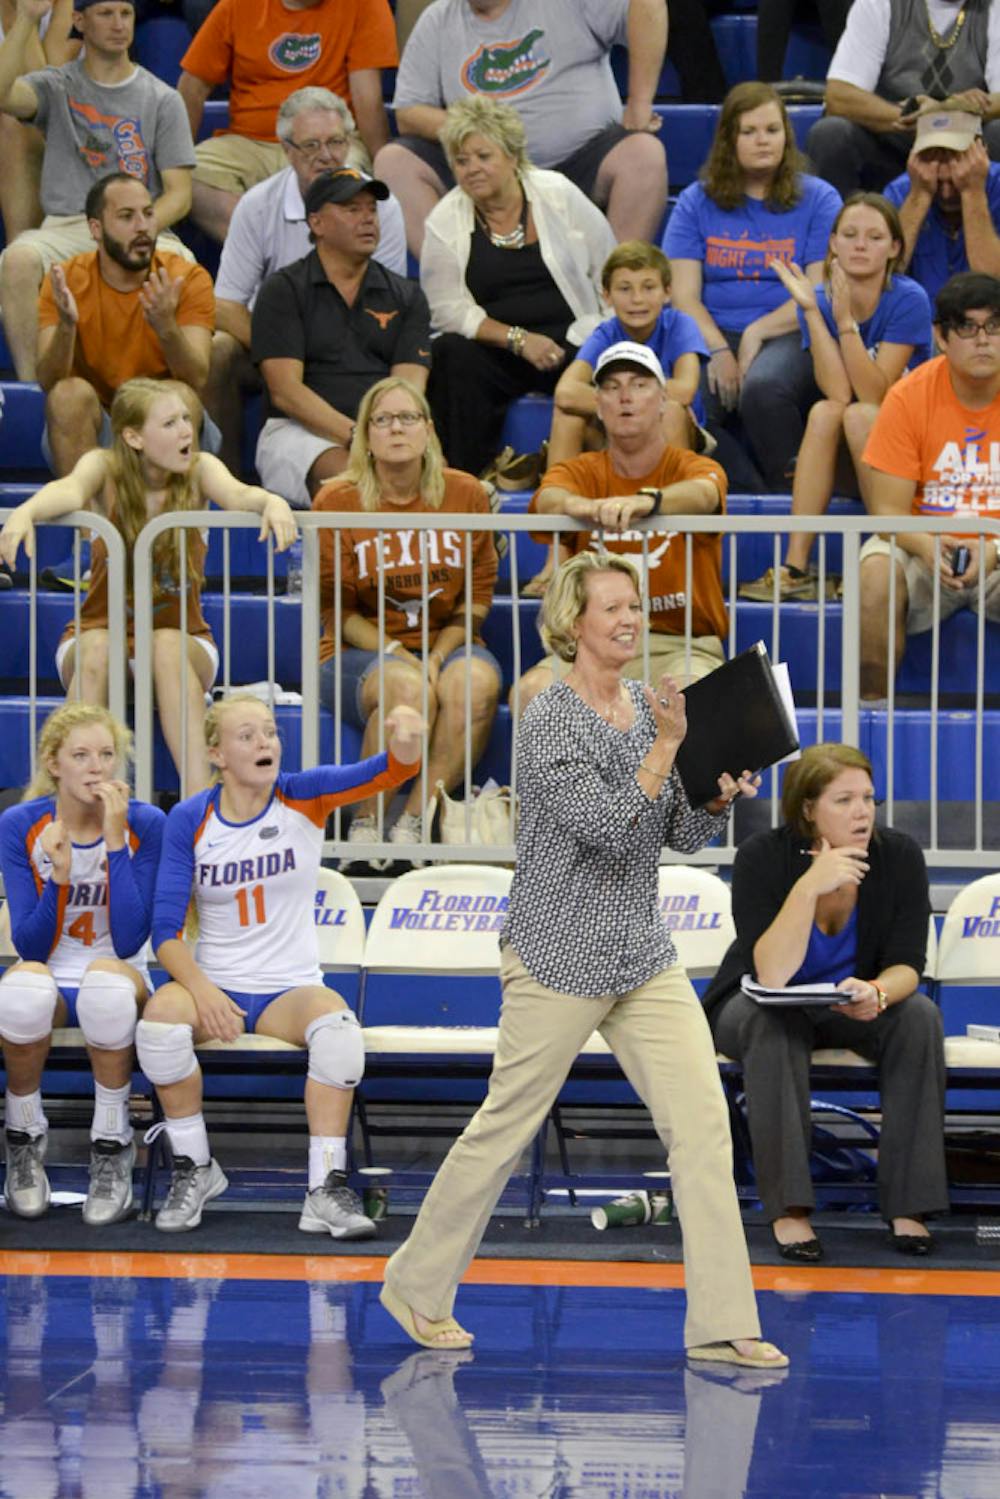 <p>UF coach Mary Wise reacts after a point during Florida's 3-1 loss to Texas on Sept. 6 in the O'Connell Center.</p>